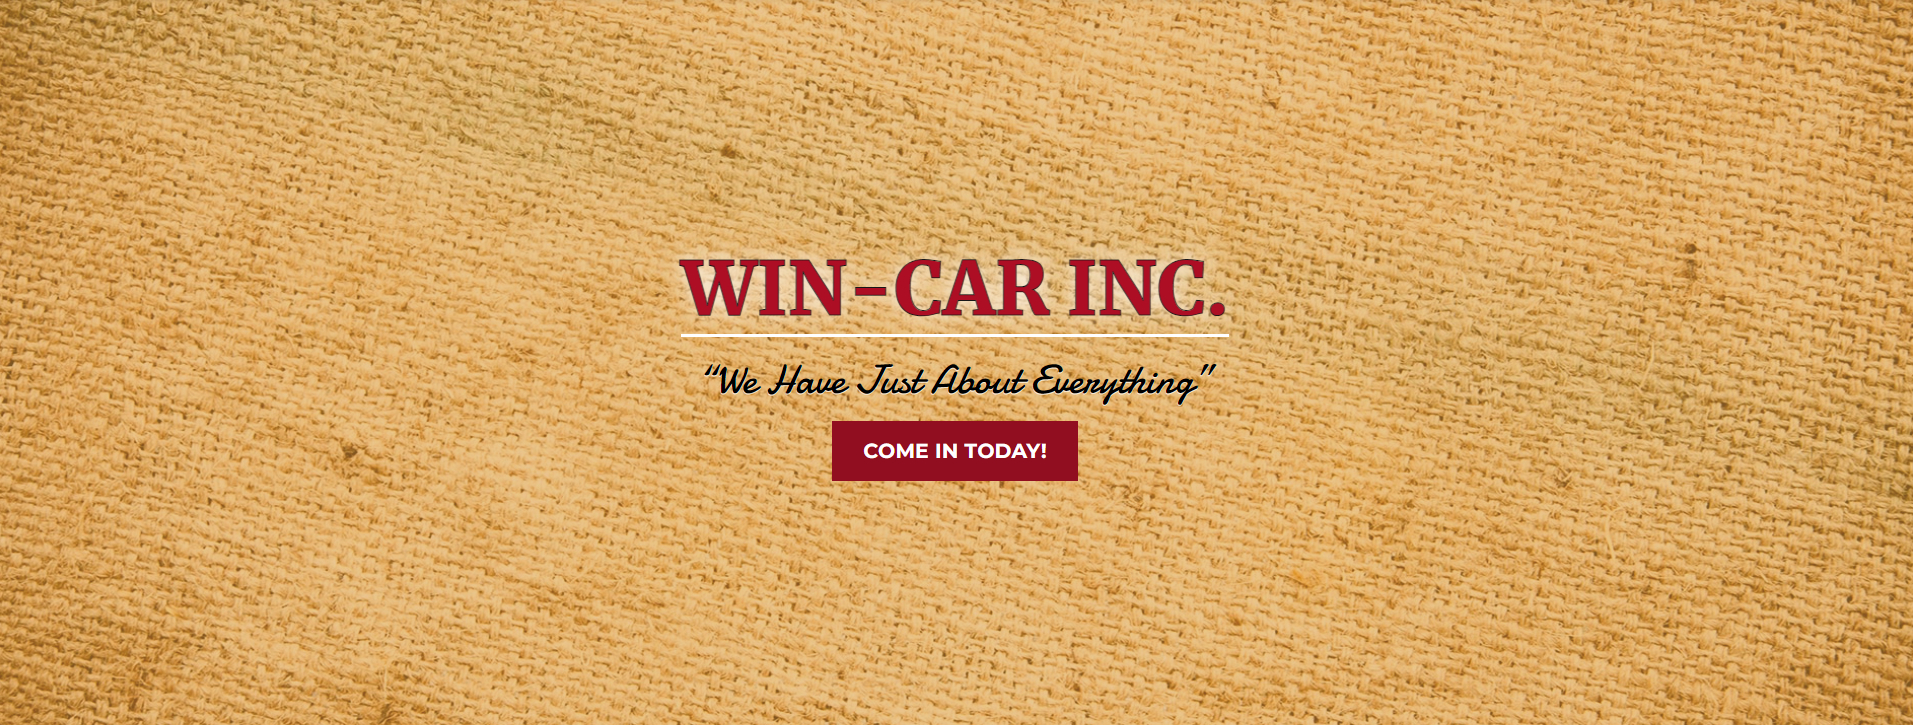 Win Car Inc Gifts and Hardware General Store in Everglades City FL Downloaded 1